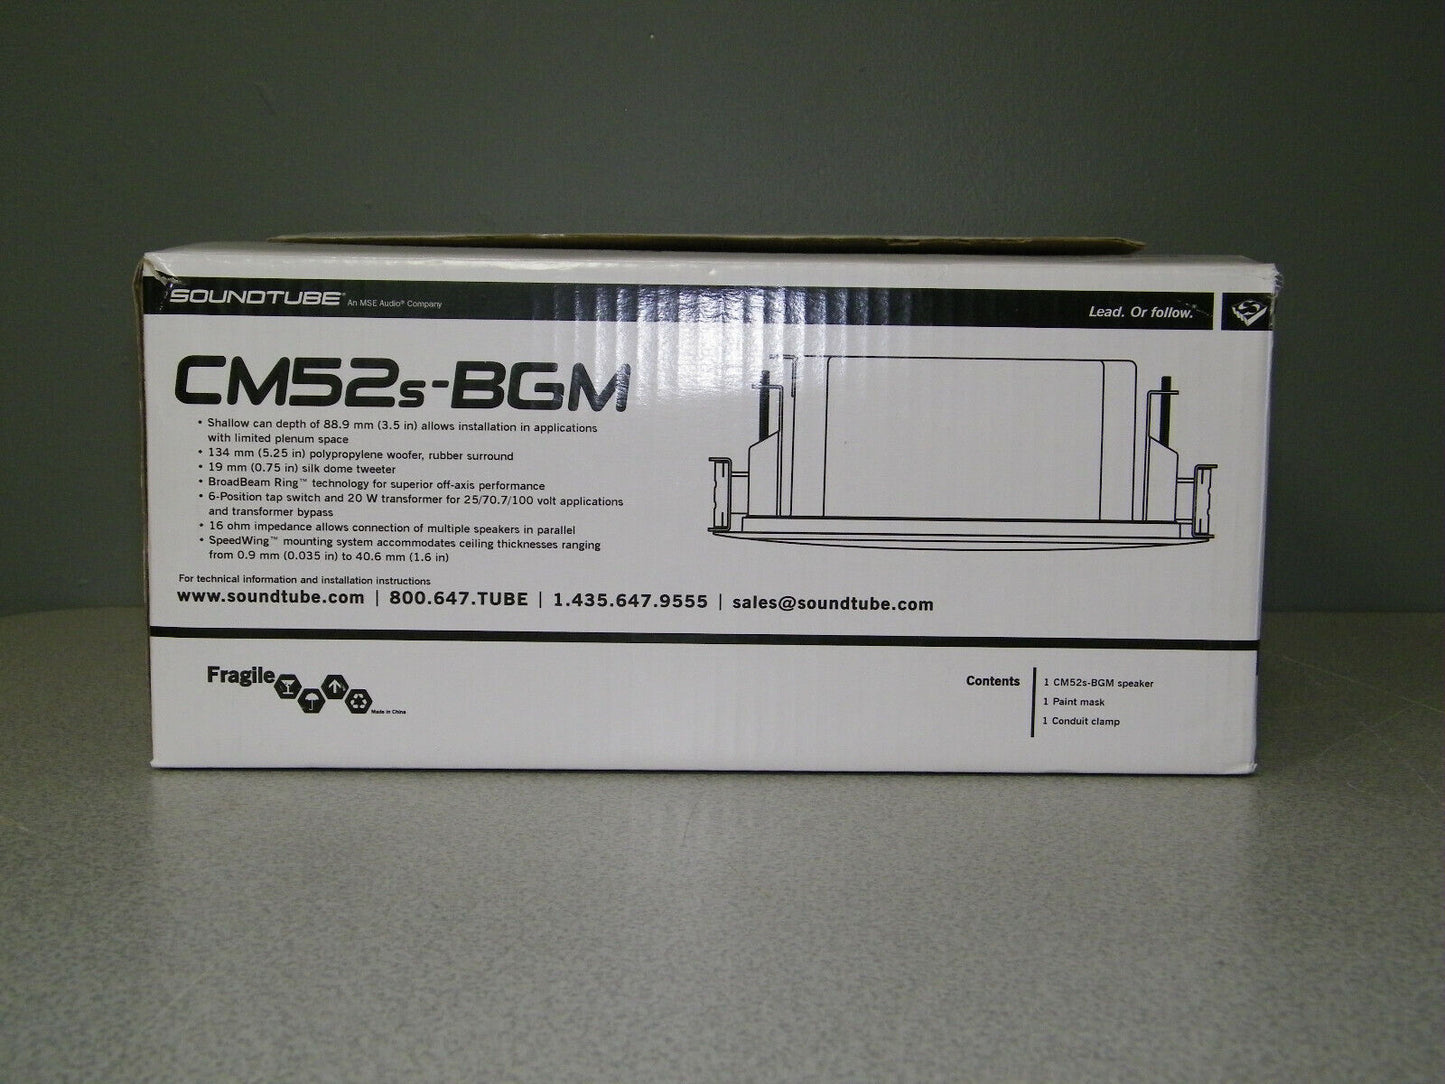 Soundtube CM52s-BGM-WH / 5.25in COAX IN-CEILING BACKGROUND BACKCAN SPEAKER